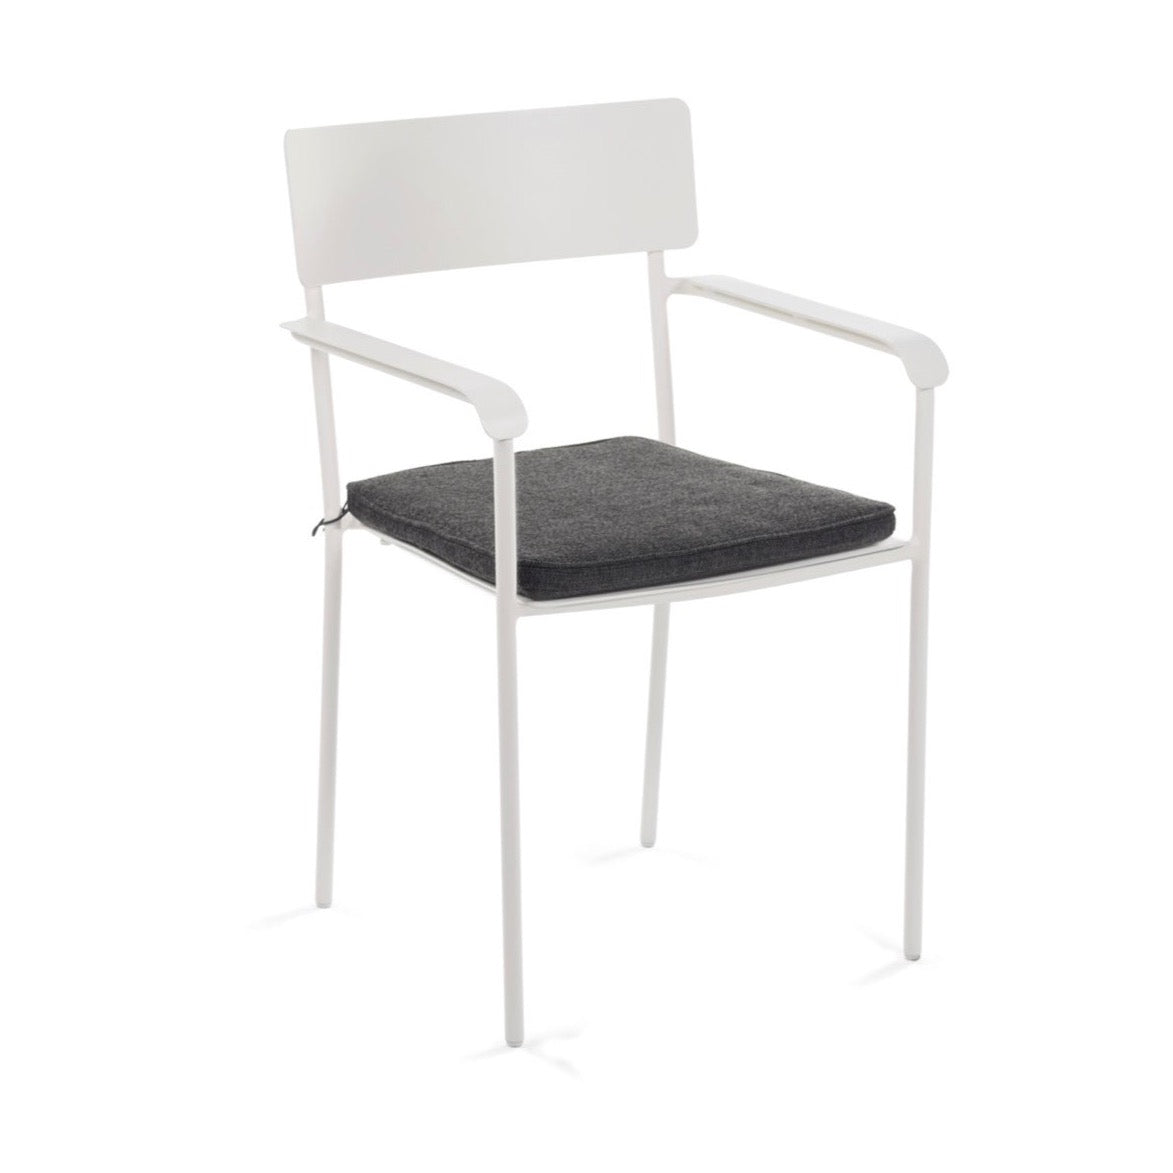 Serax August compact chair with armrests by Vincent Van Duysen set of 2